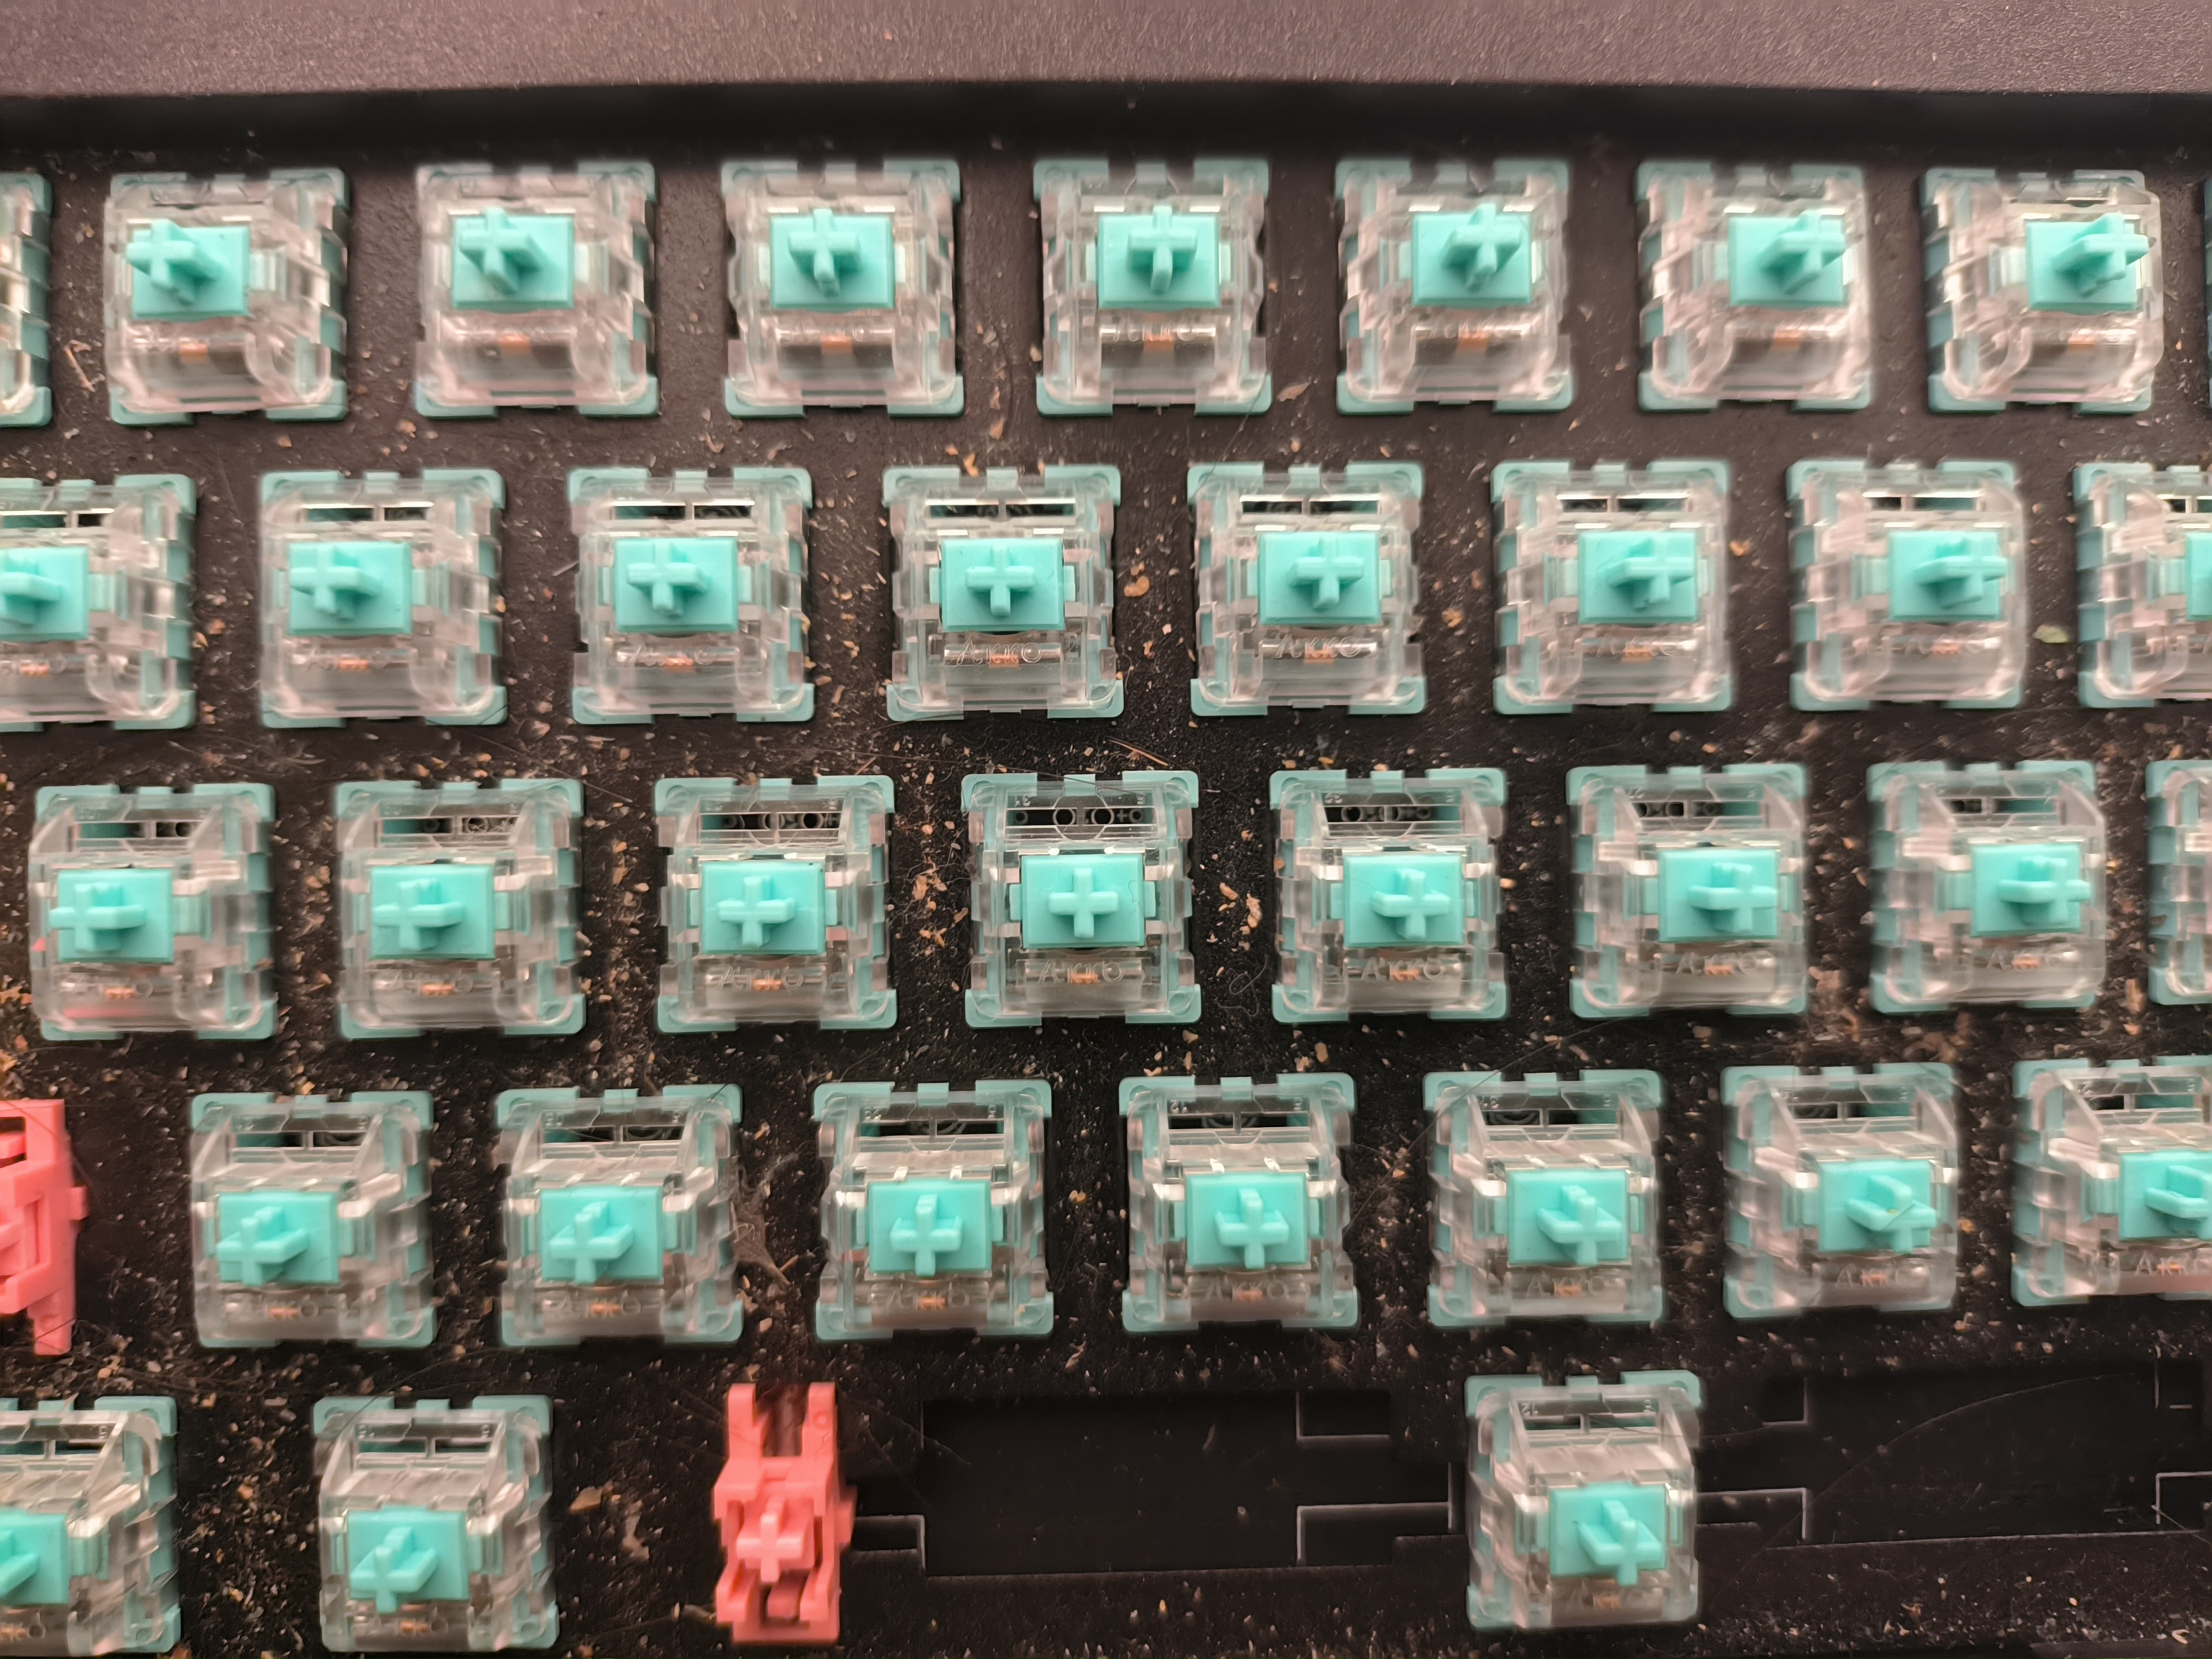 my keyboard without keycaps, with a lot of dirt